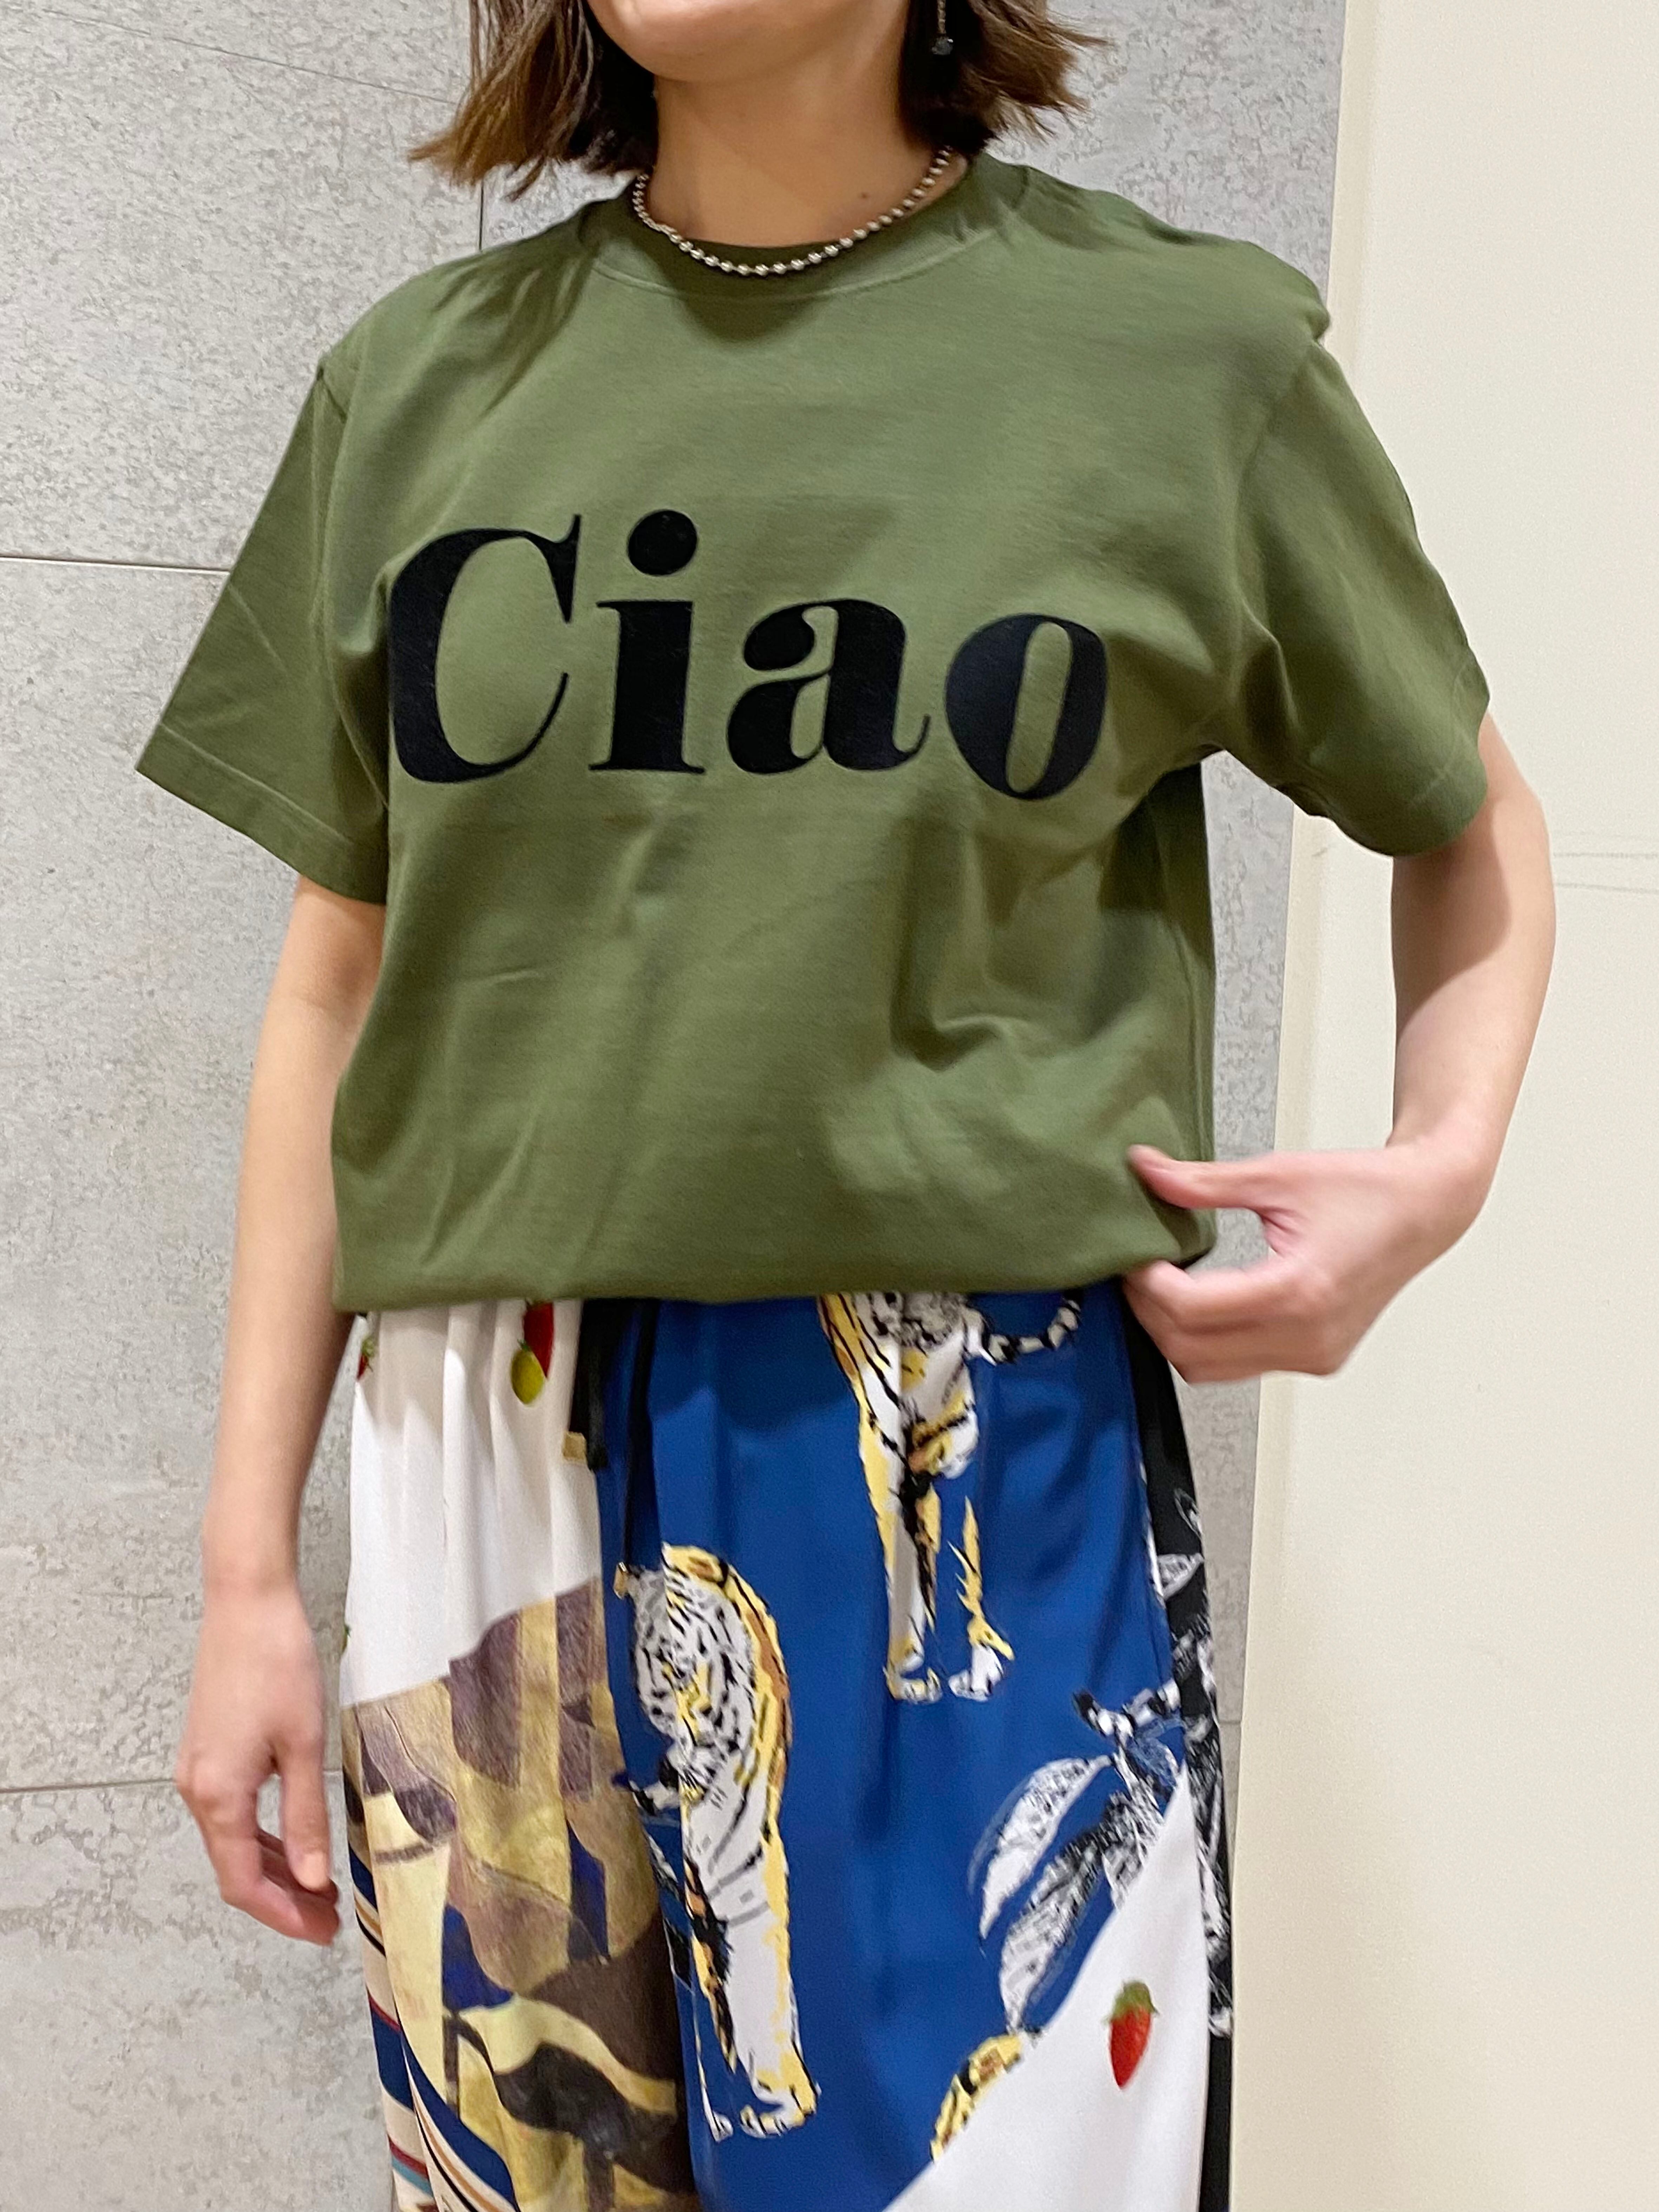 Ciaoフロッキーロゴtee［Color:カーキ］